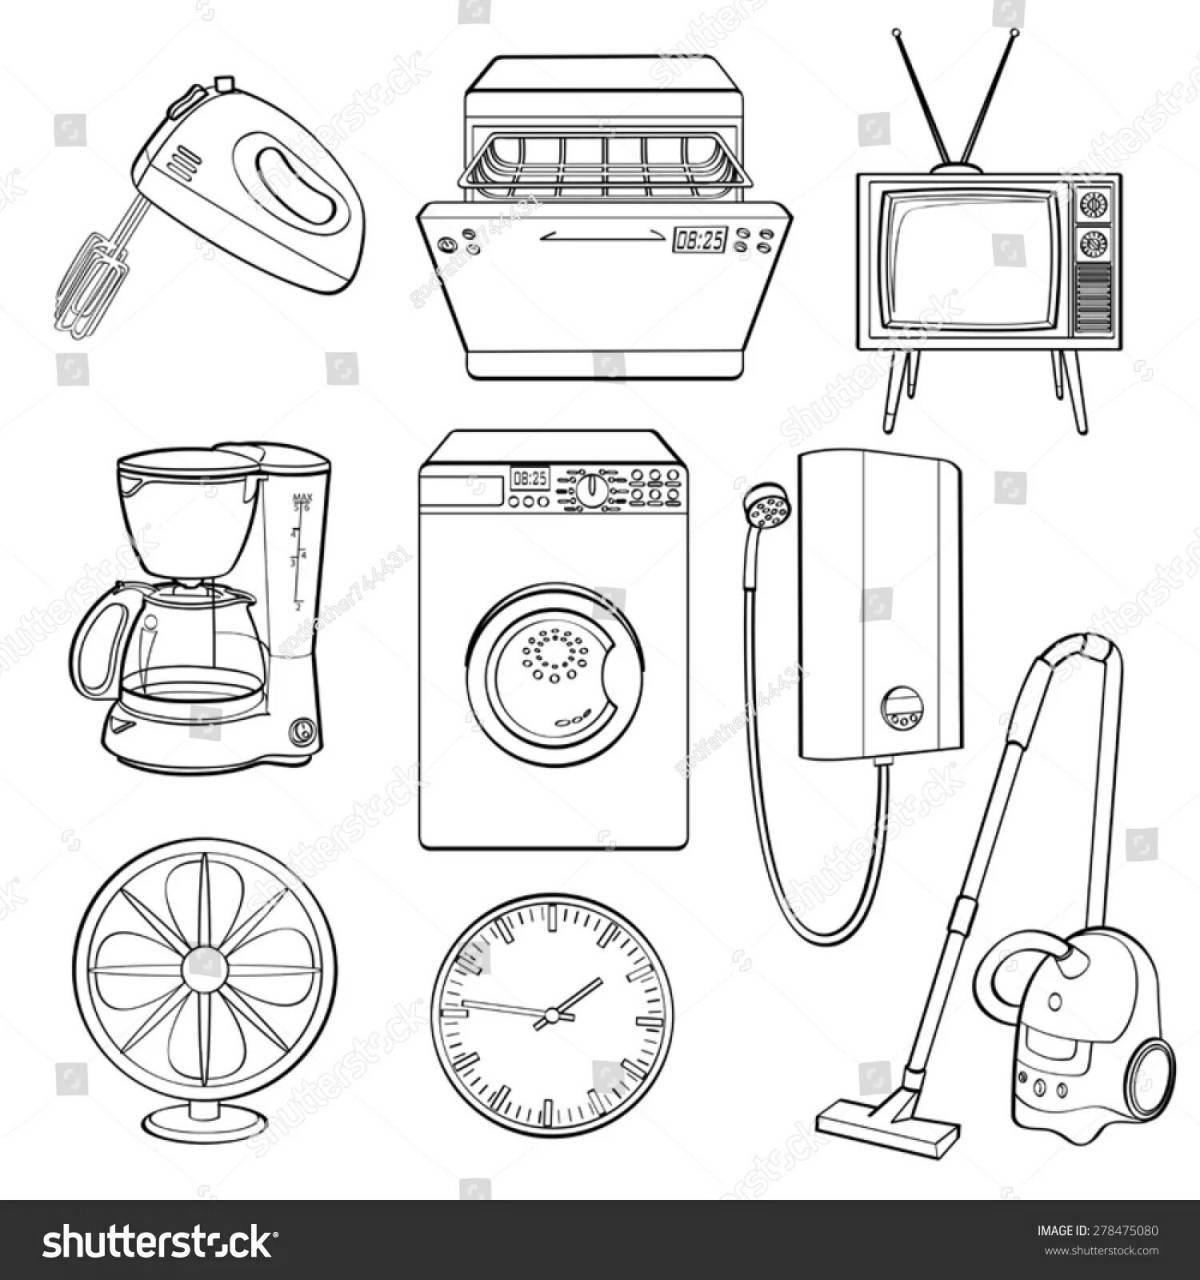 Creative household appliances coloring book for 4-5 year olds